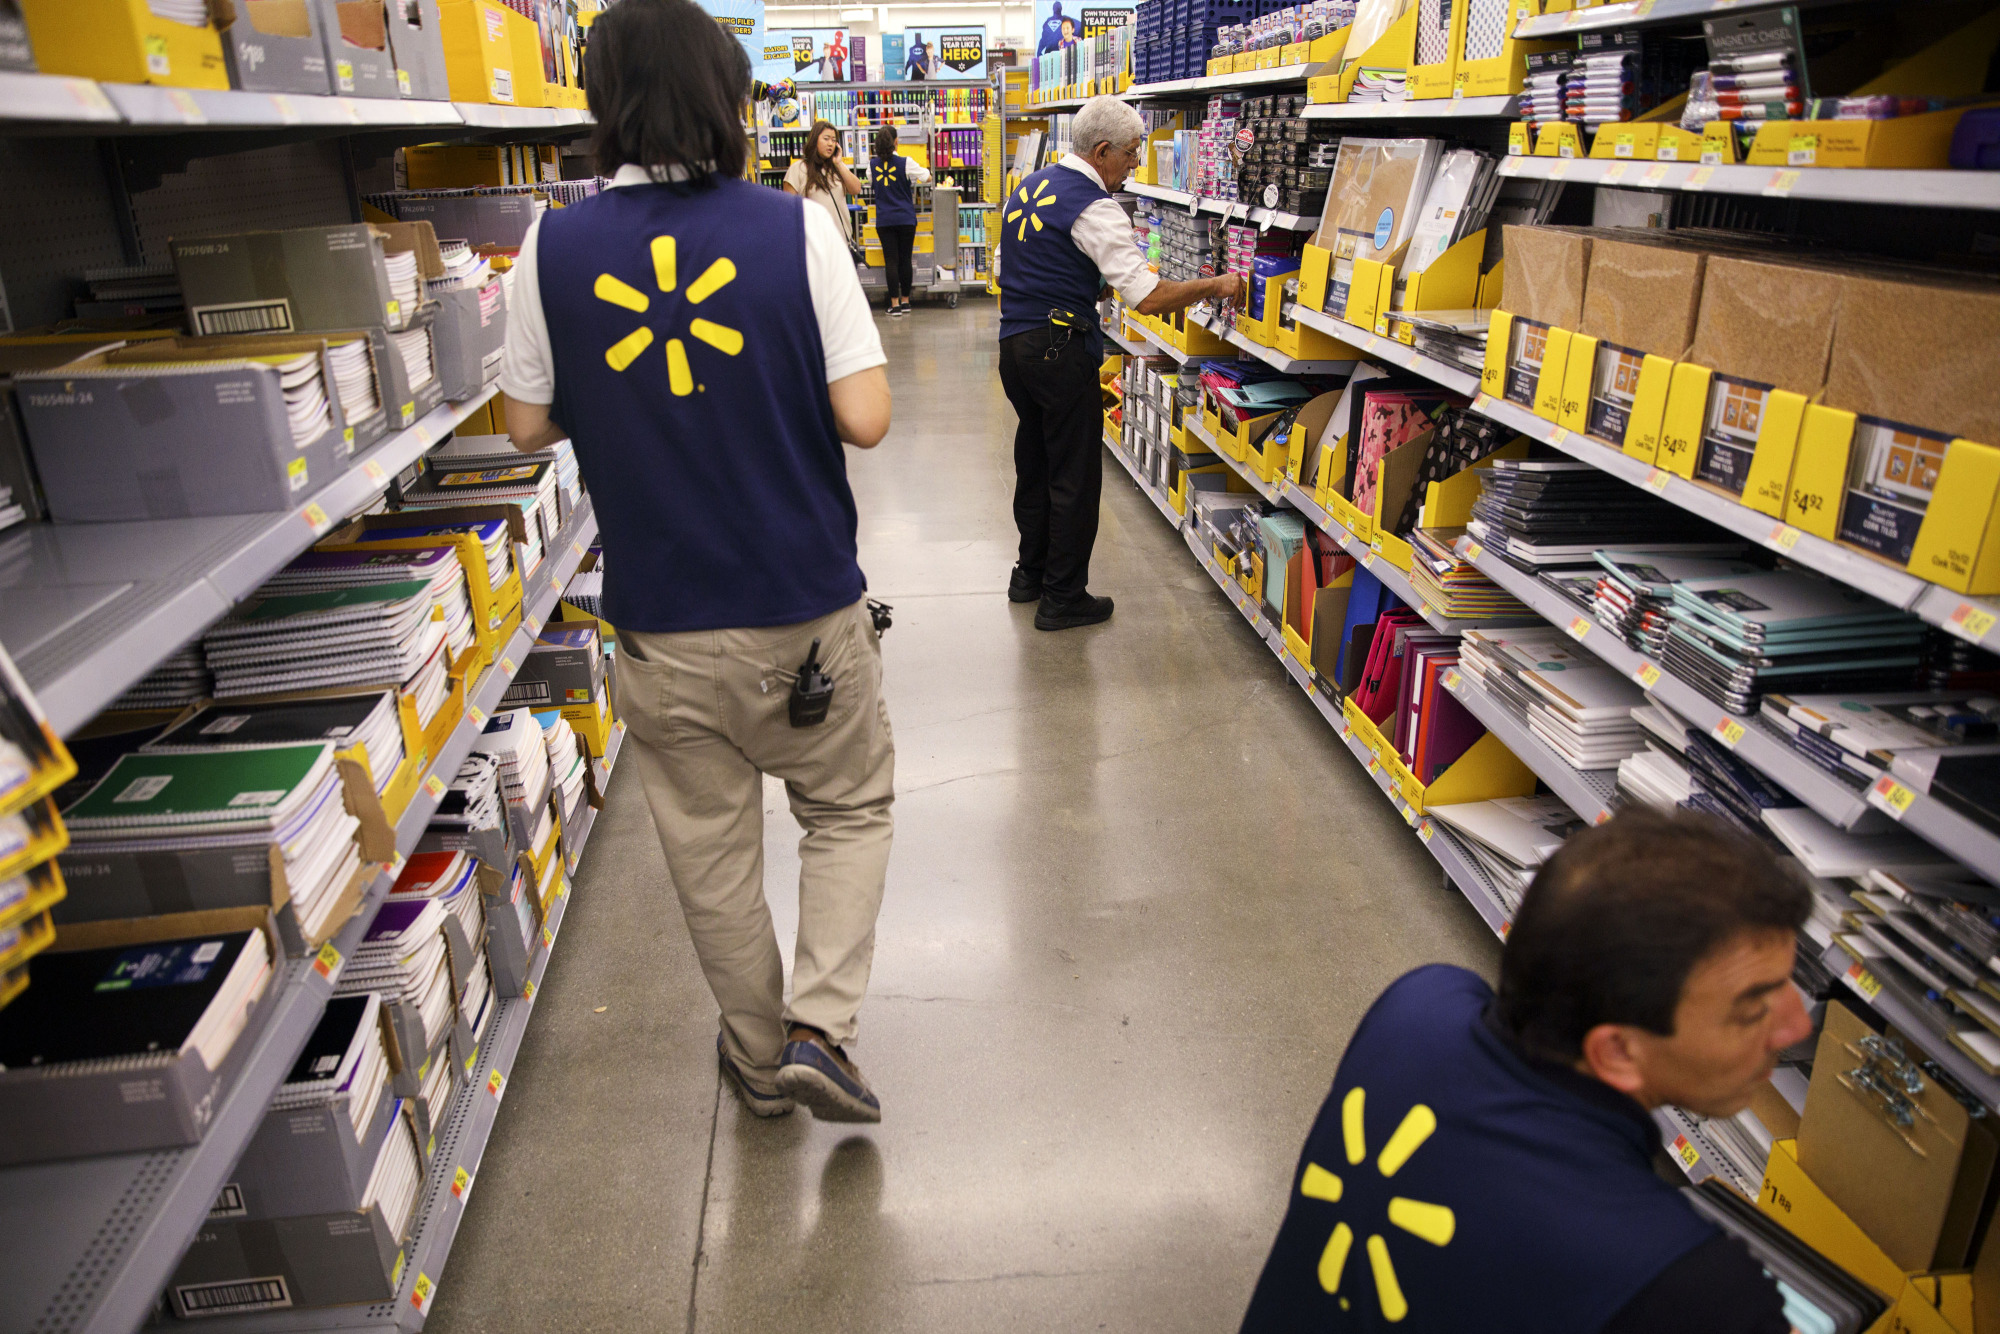 Employees restock shelves of school supplies at a Wal-Mart Stores Inc. location in Burbank, California, U.S.